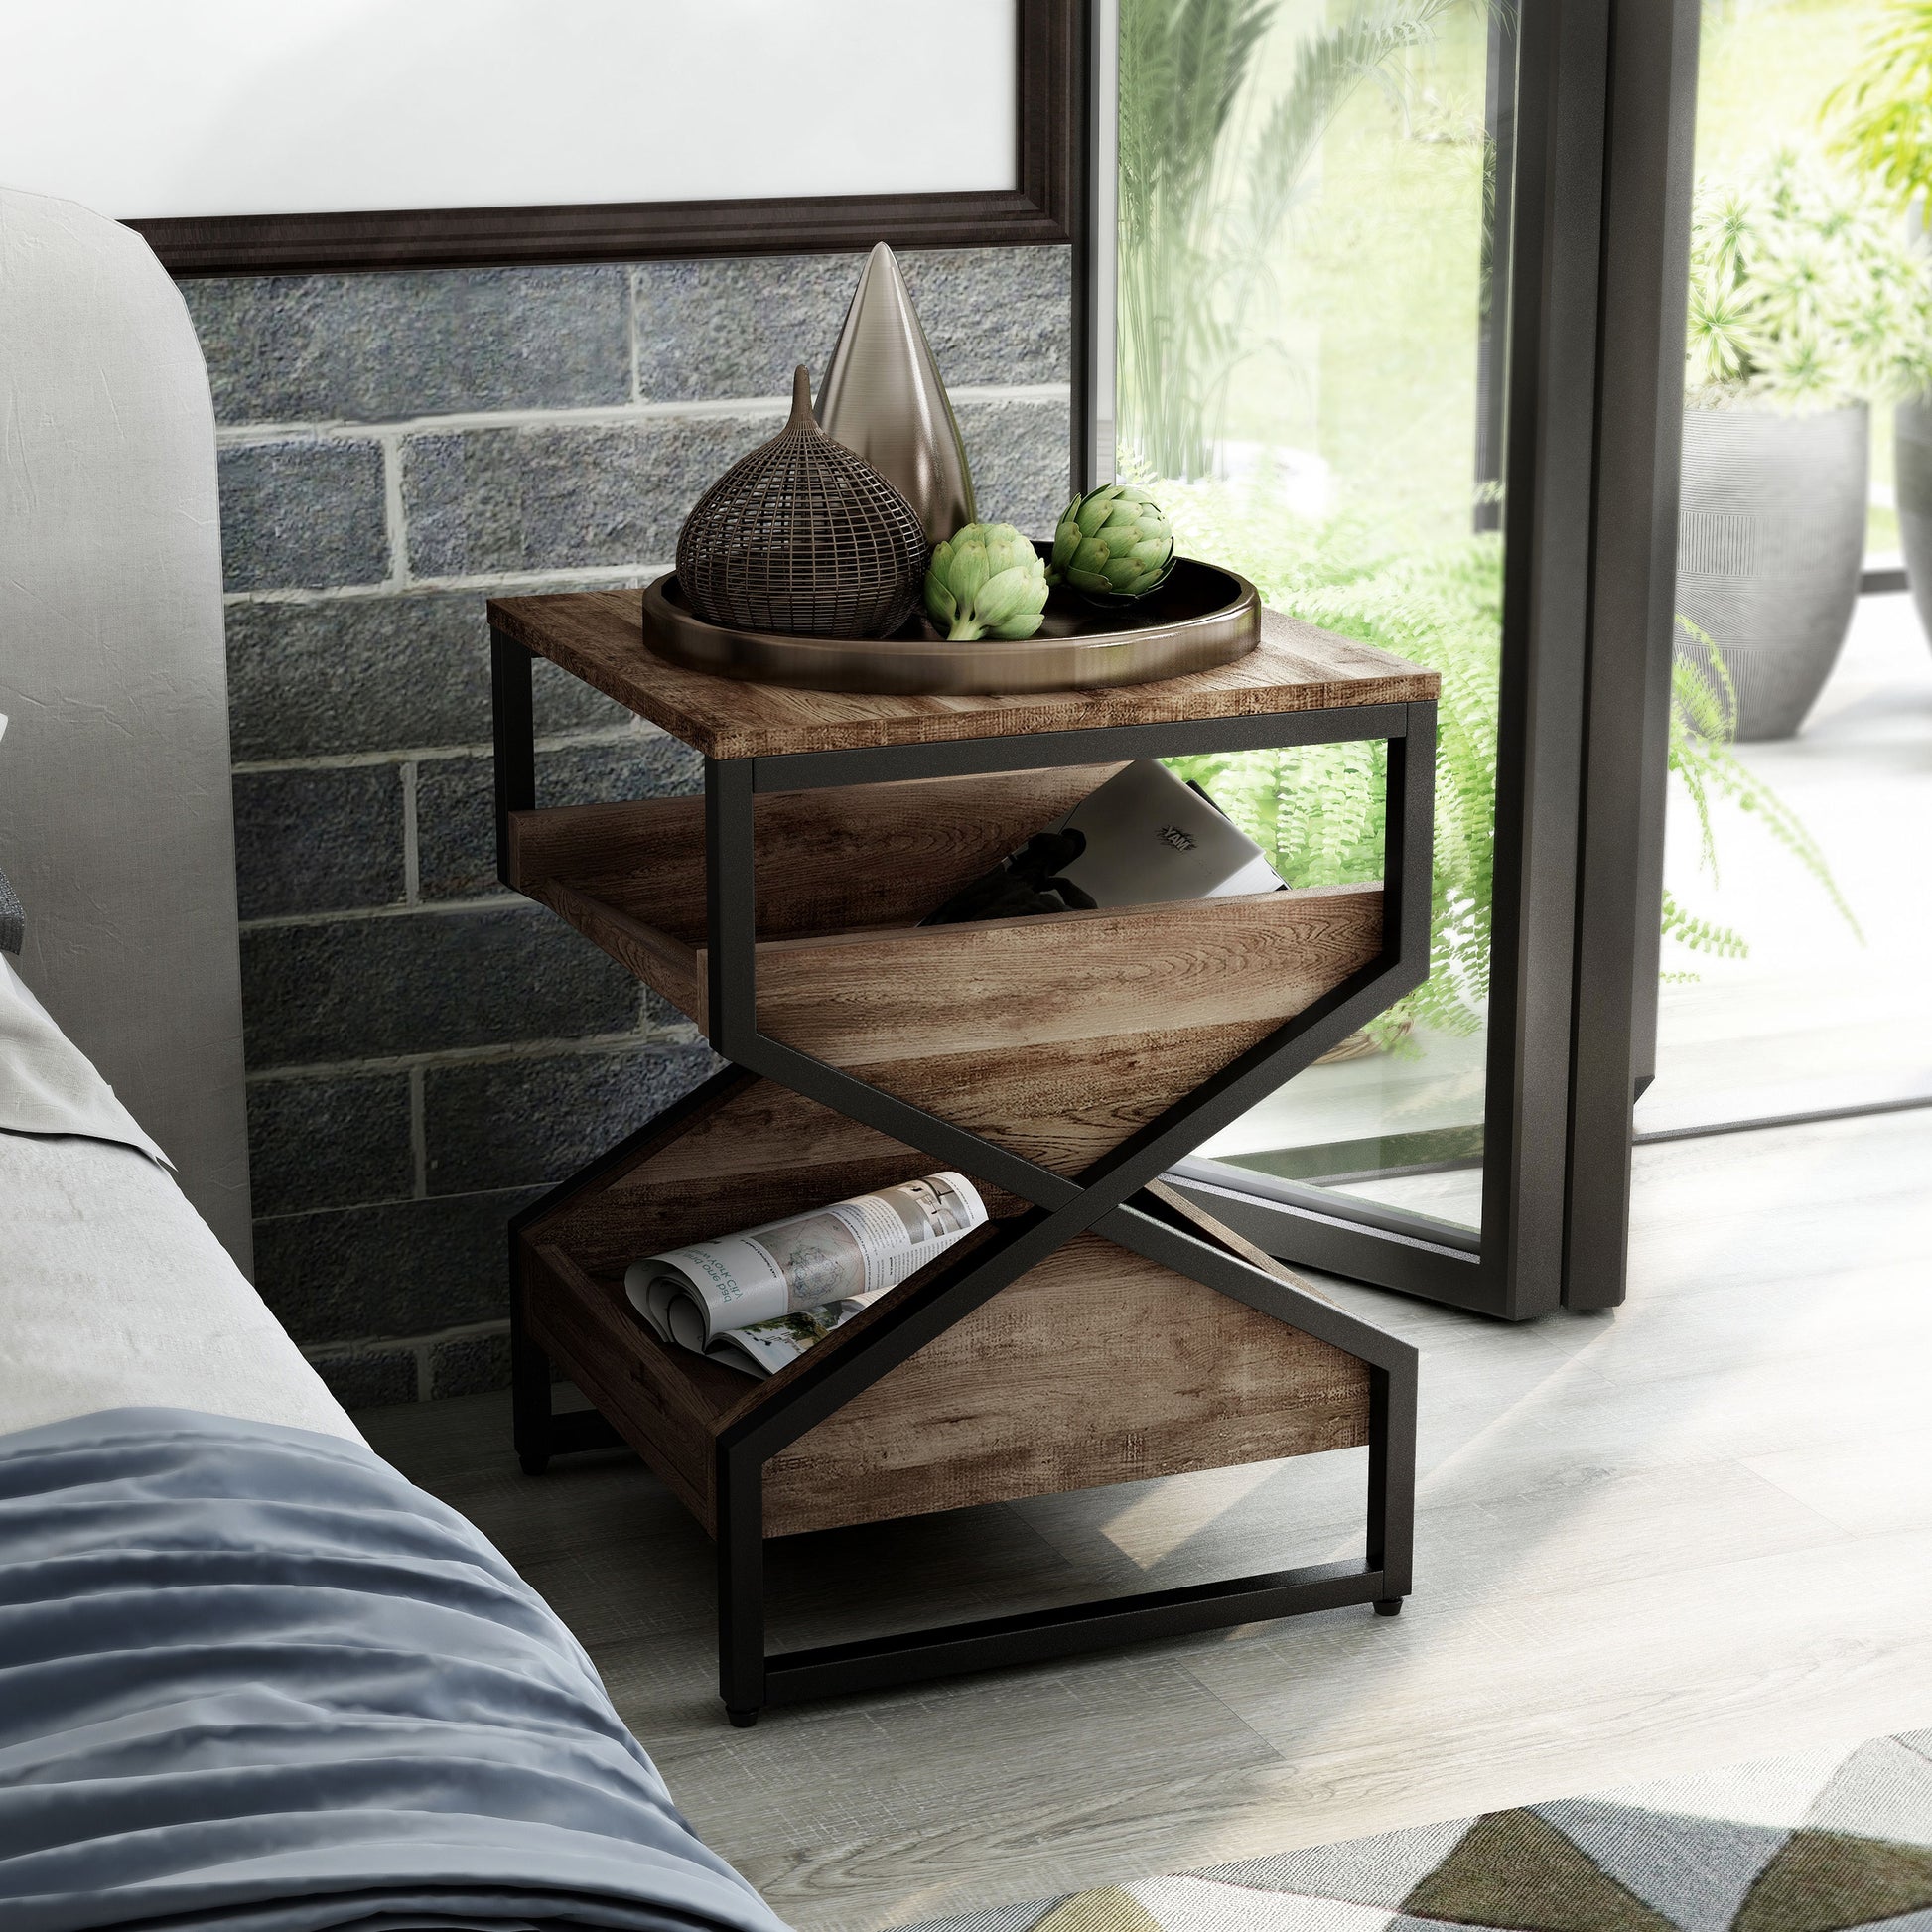 Right angled industrial reclaimed oak end table with a pull-out tray shelf in a bedroom with accessories